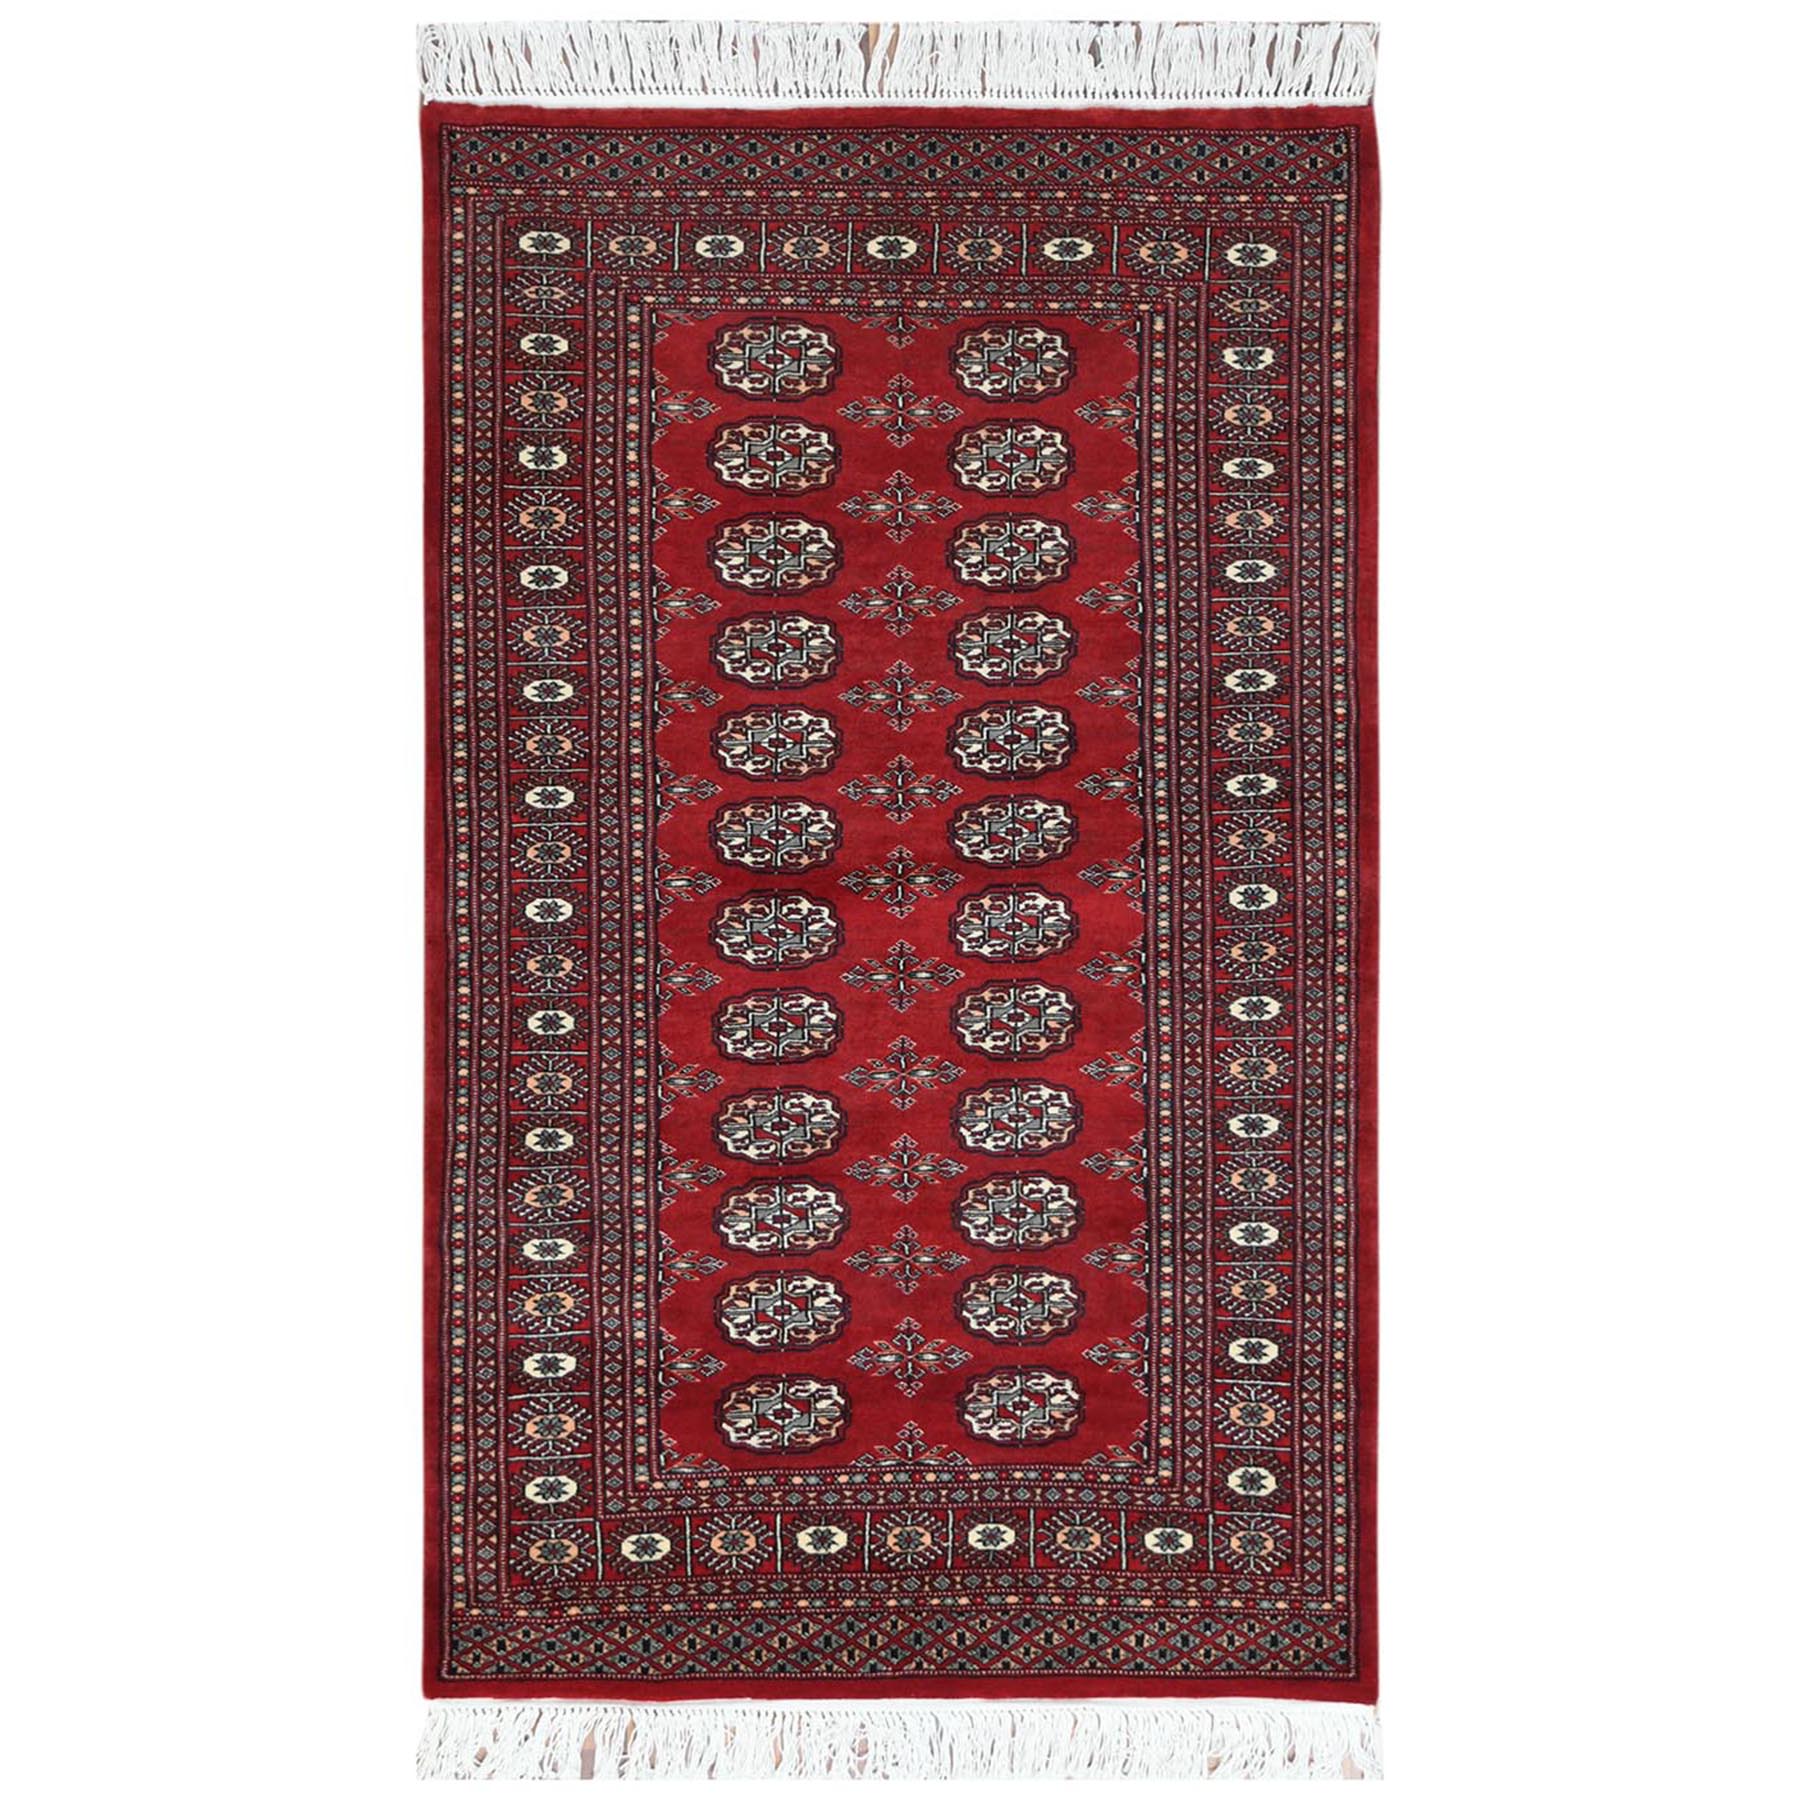 Nomadic And Village Collection Hand Knotted Red Rug No: 1122740